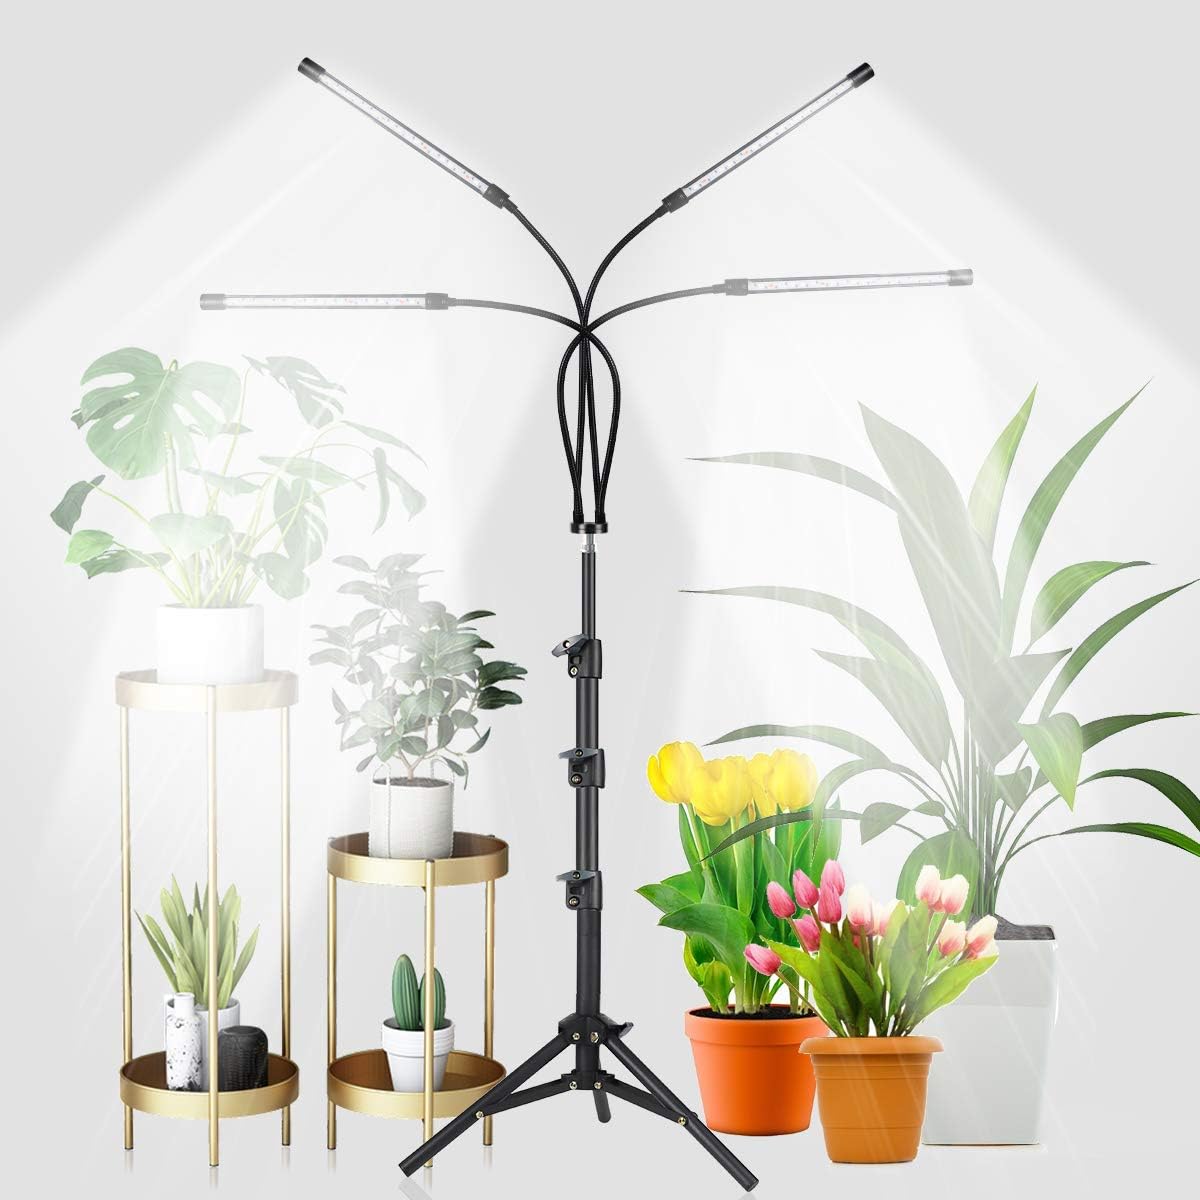 GHodec Grow Light with Stand, 80 LED 5500K Full [...]